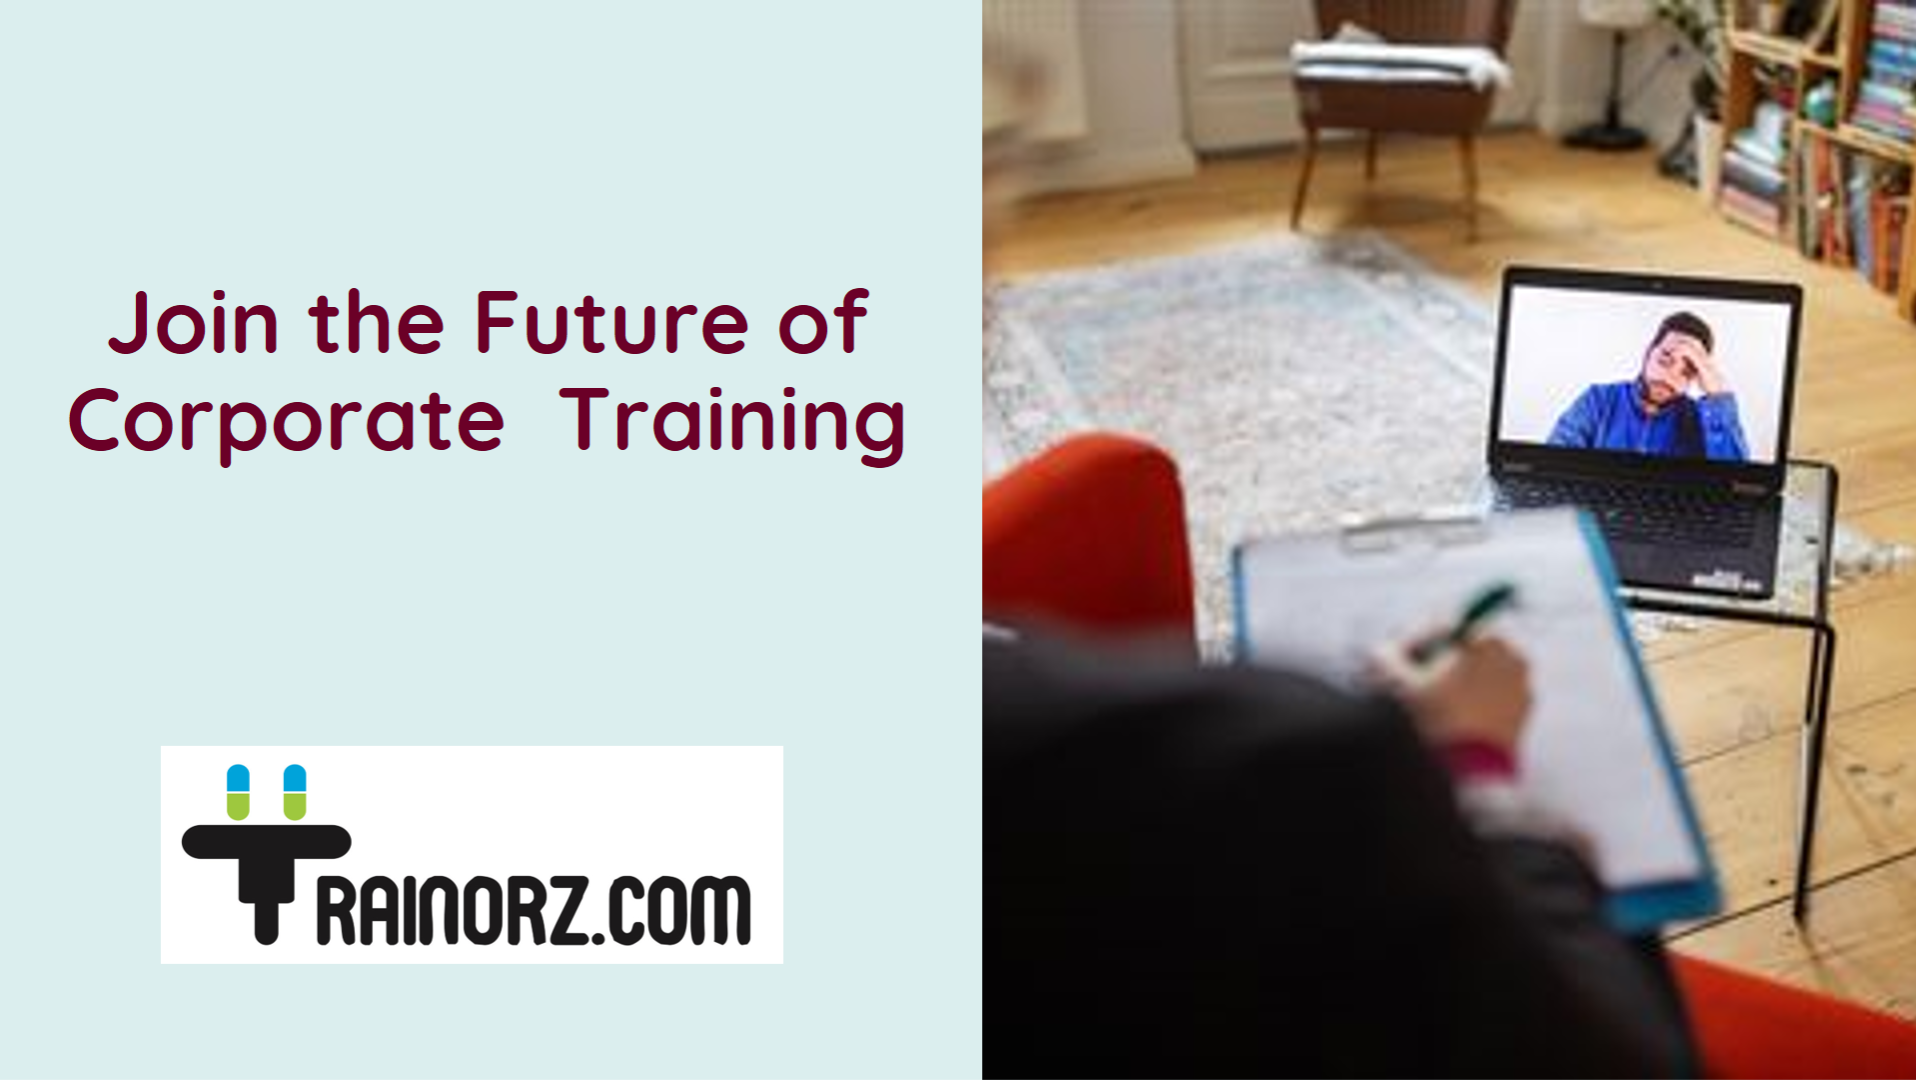  The Future of Training: Freelance Trainer Opportunities at Trainorz.com